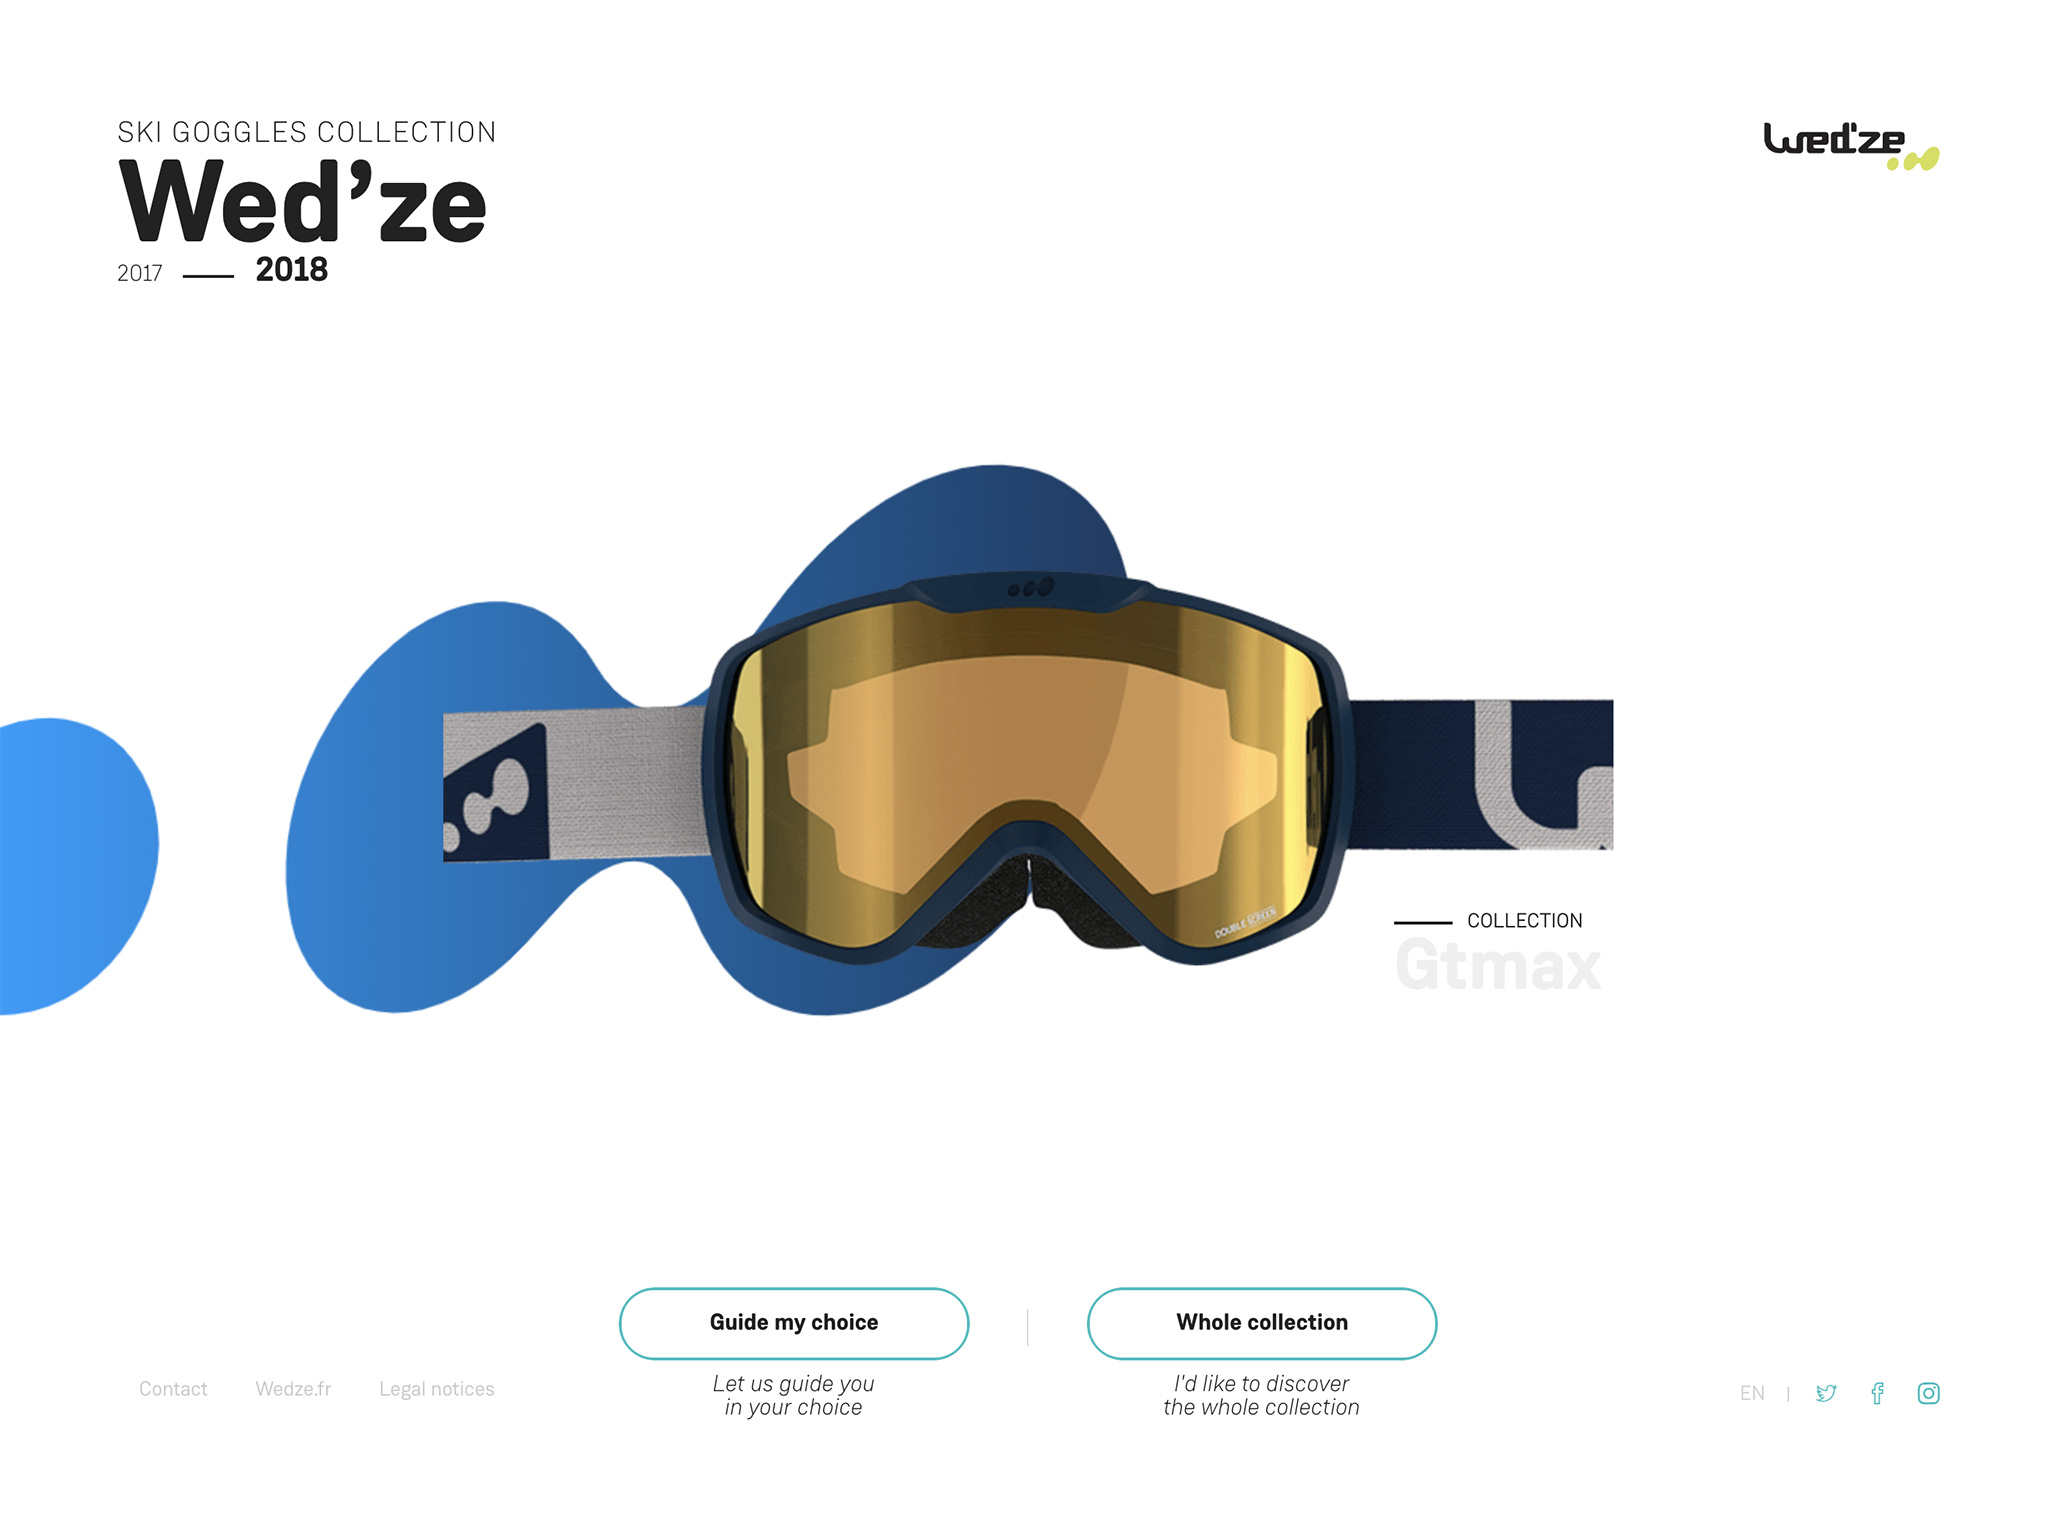 Wed’ze ski goggles collection 2017 – 2018